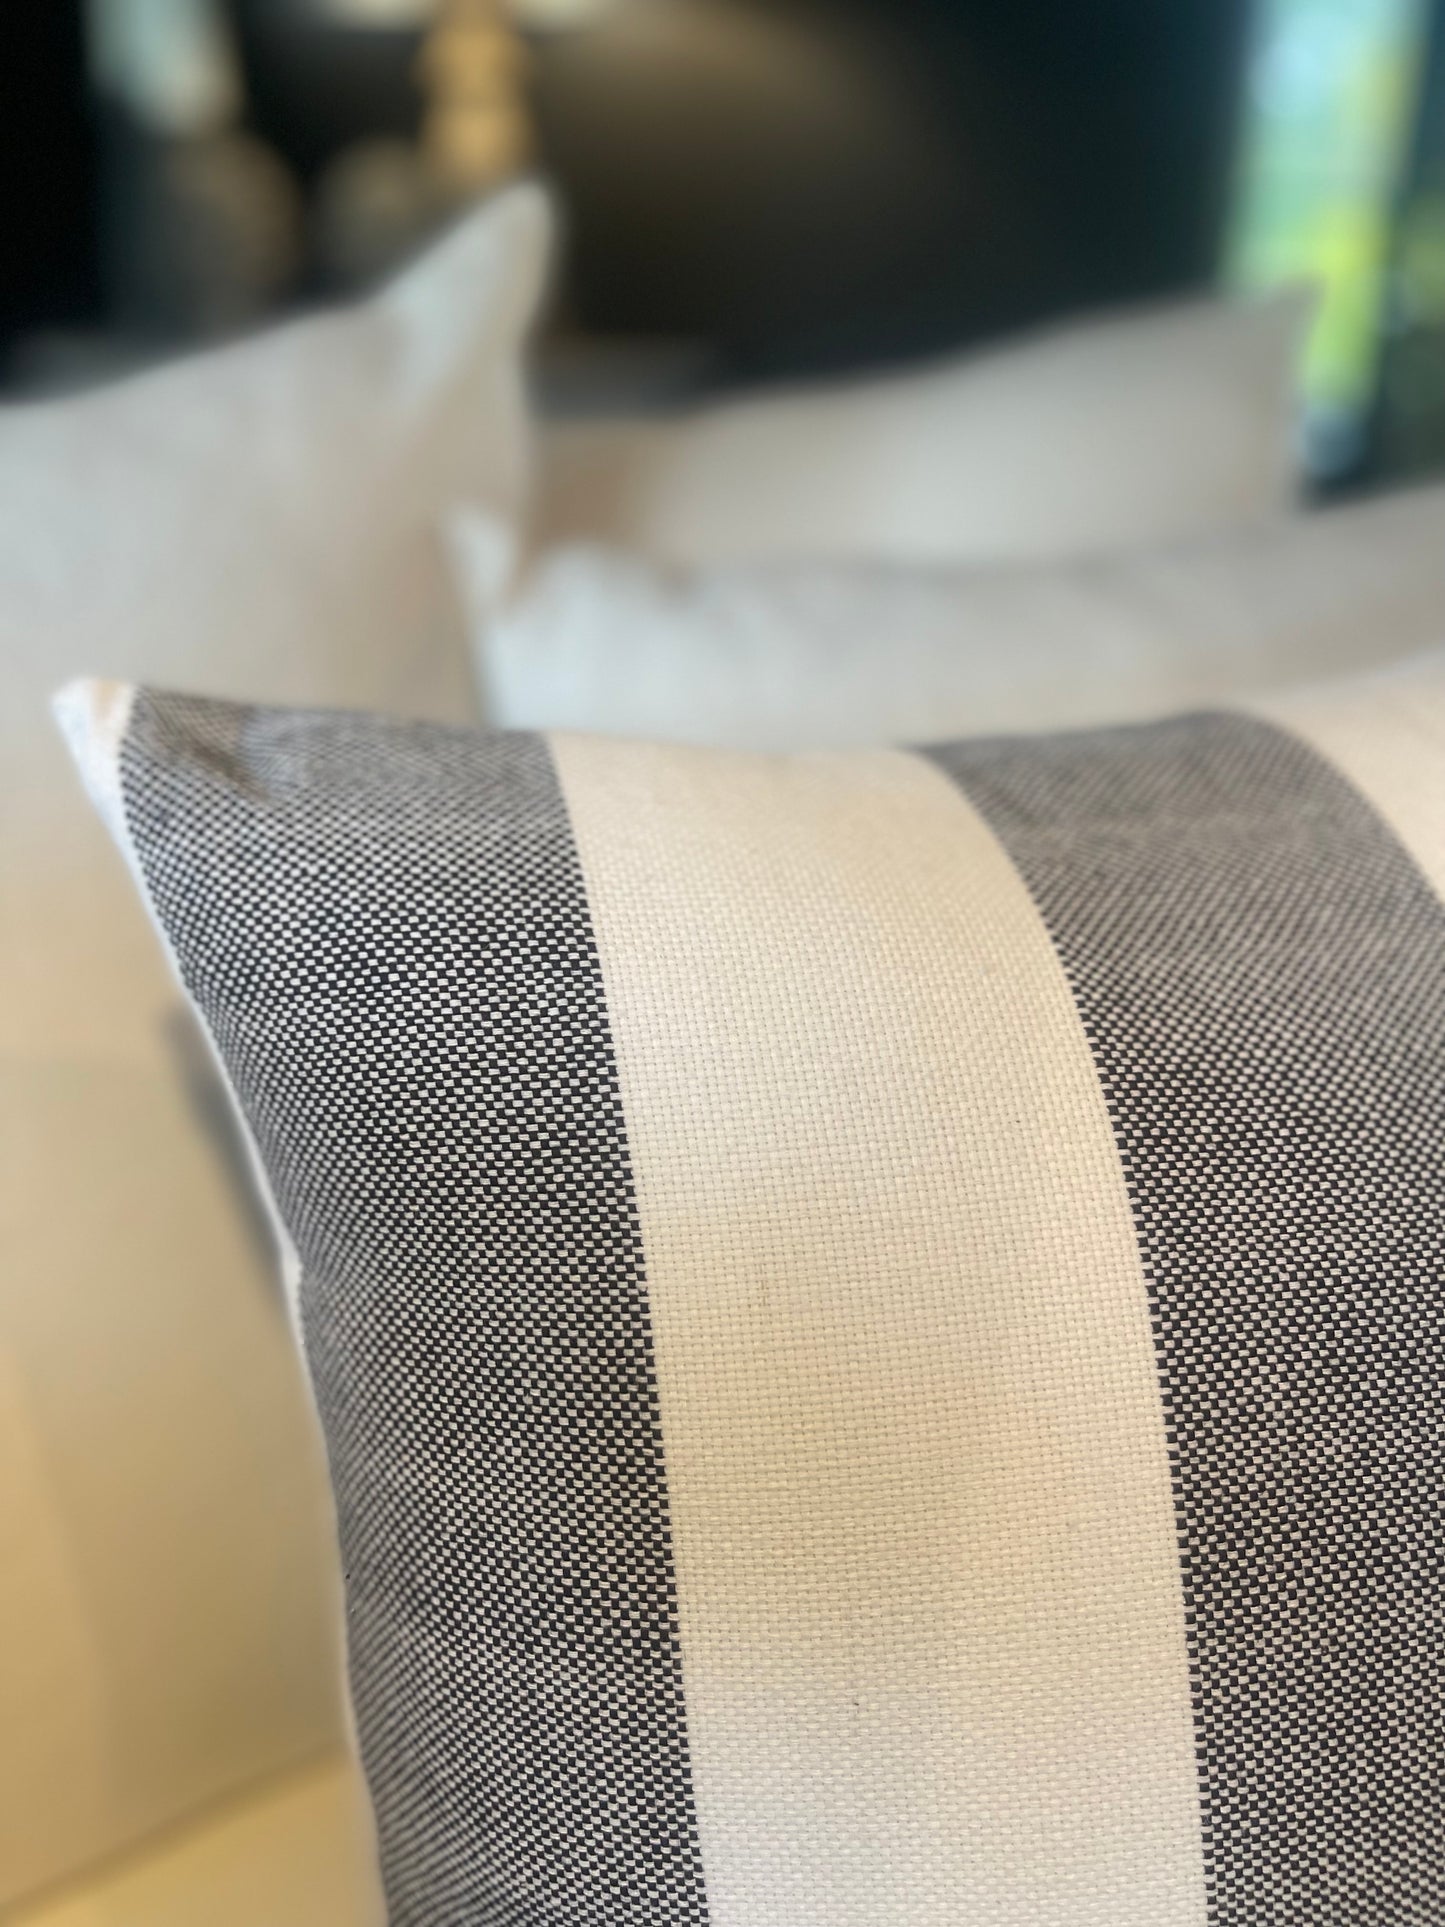 Our Lyon Handwoven Cotton Cushion boasts sleek stripes and provides versatile styling, ideal for complementing sofas and beds. Its luxurious Dacron insert adds additional comfort. Black and white coloured. Close up corner.